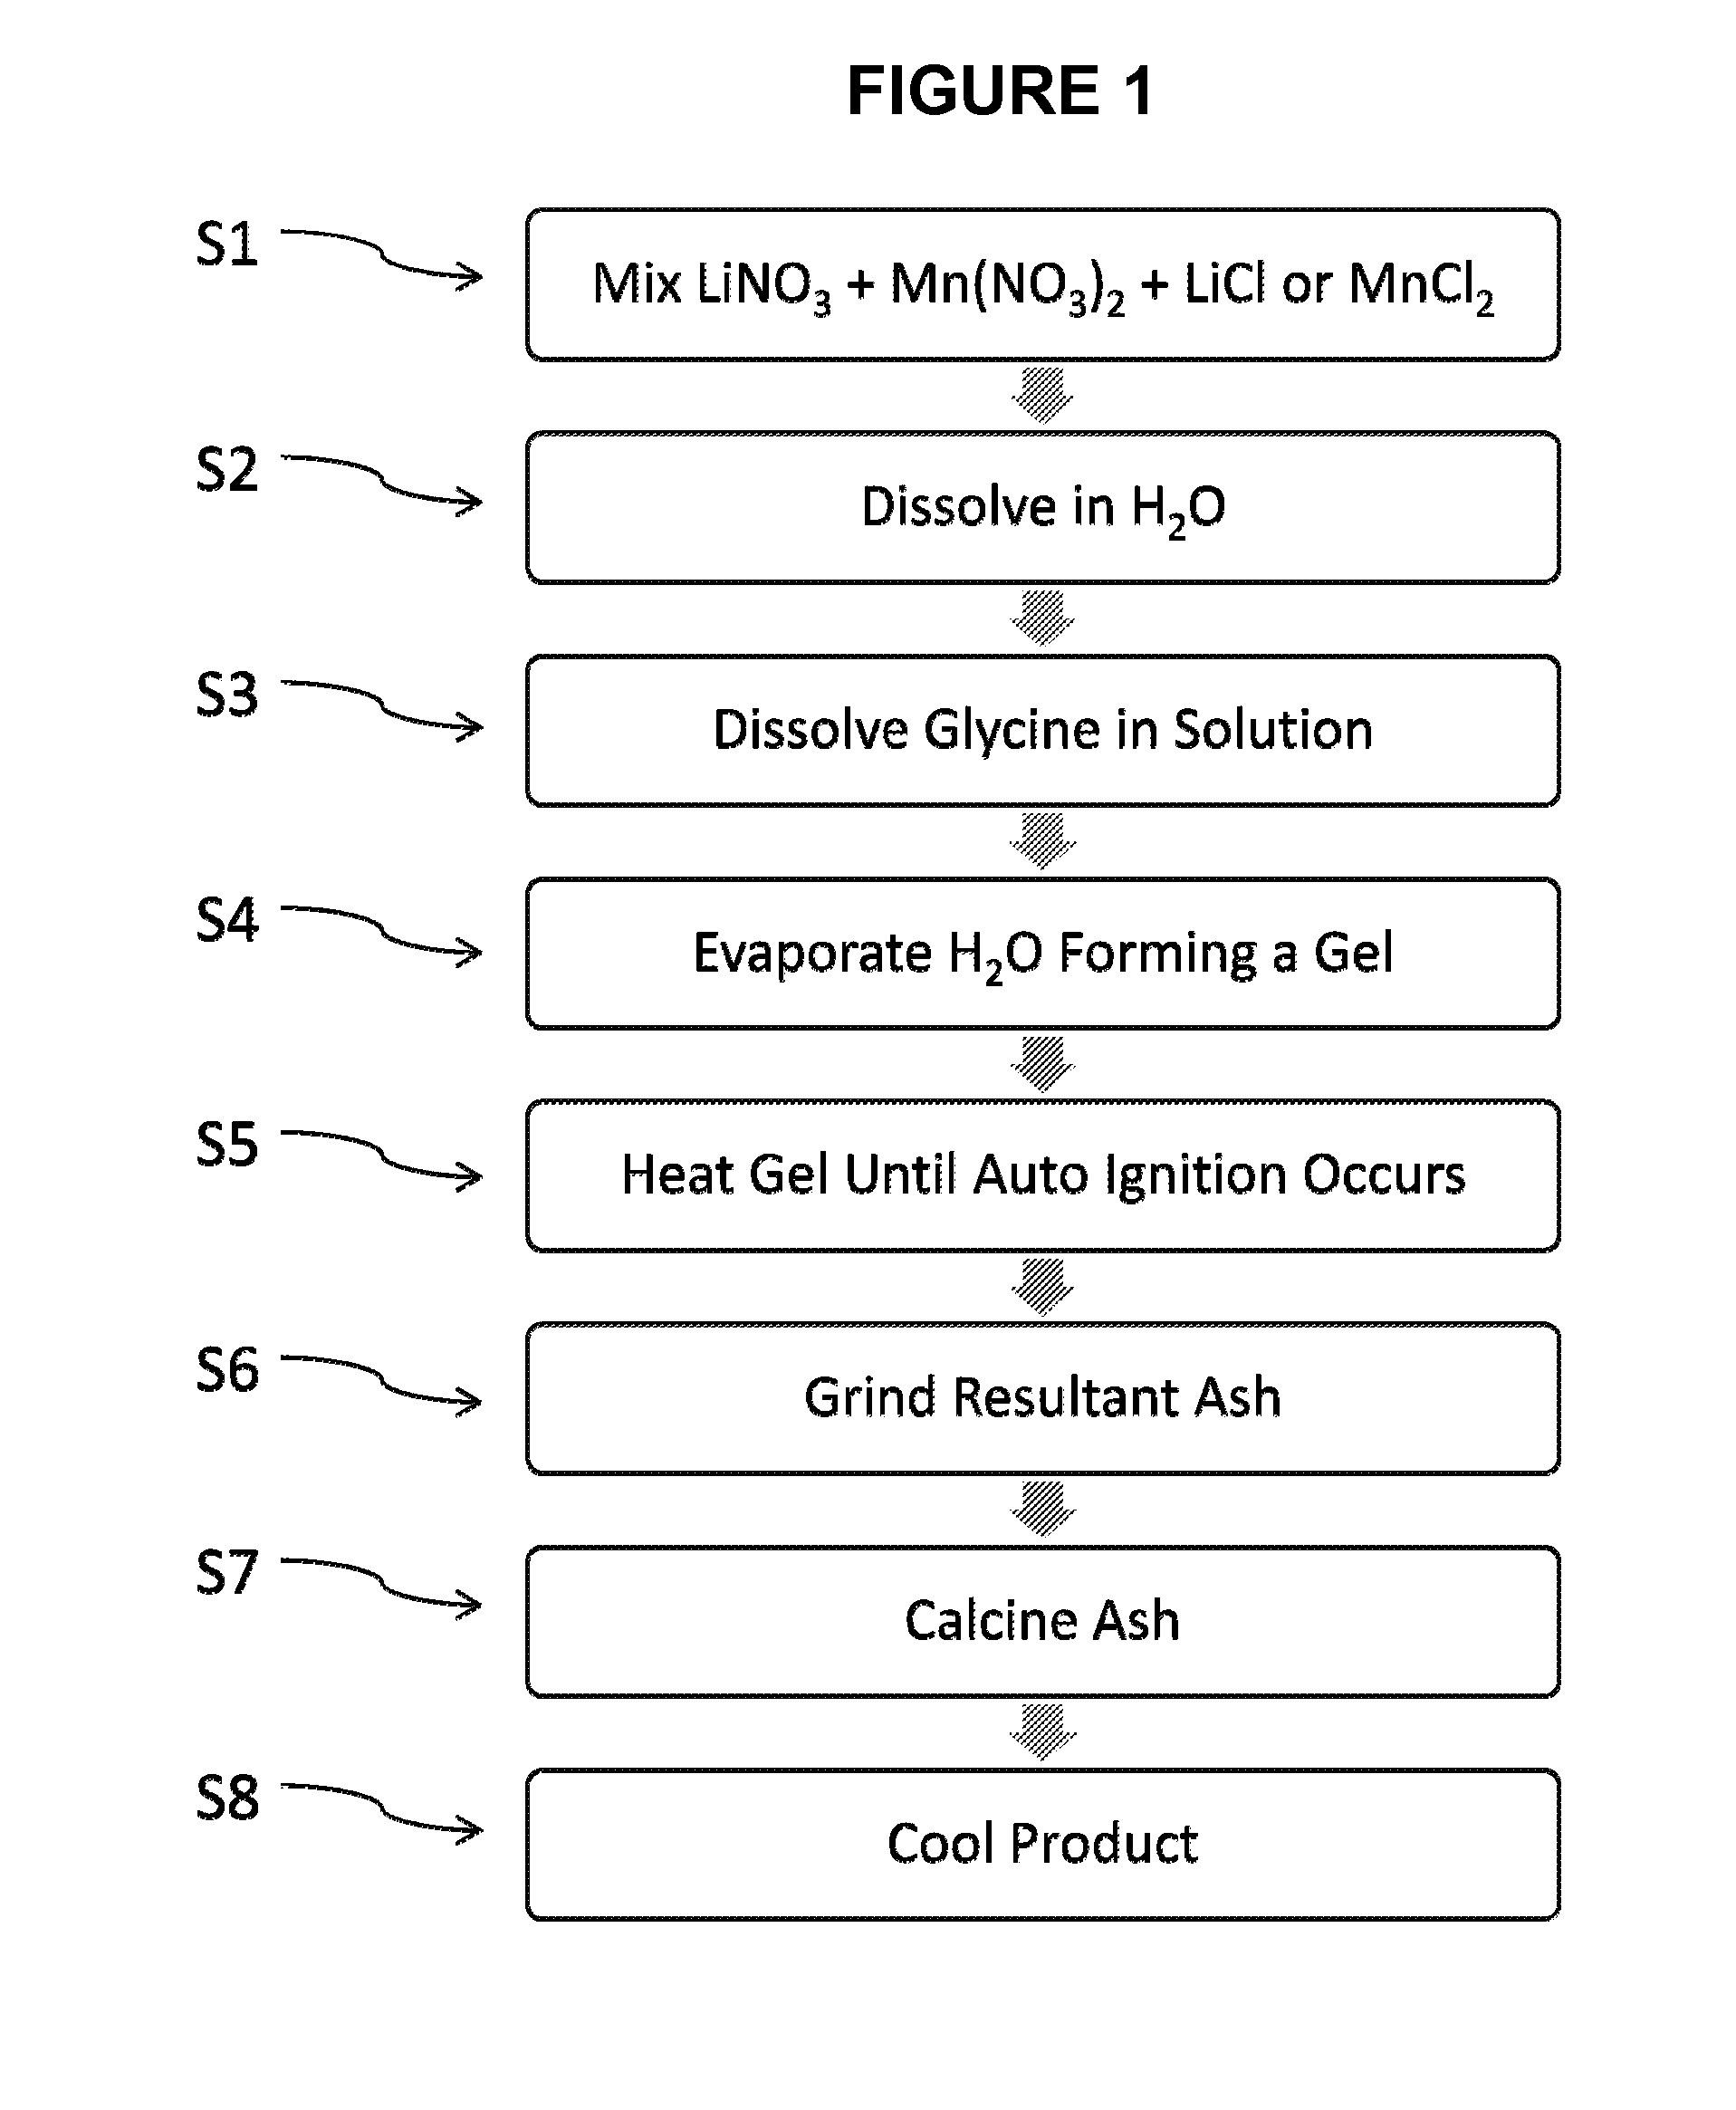 LixMn2O4-y(Clz) SPINEL CATHODE MATERIAL, METHOD OF PREPARING THE SAME, AND RECHARGEABLE LITHIUM AND LI-ION ELECTROCHEMICAL SYSTEMS CONTAINING THE SAME